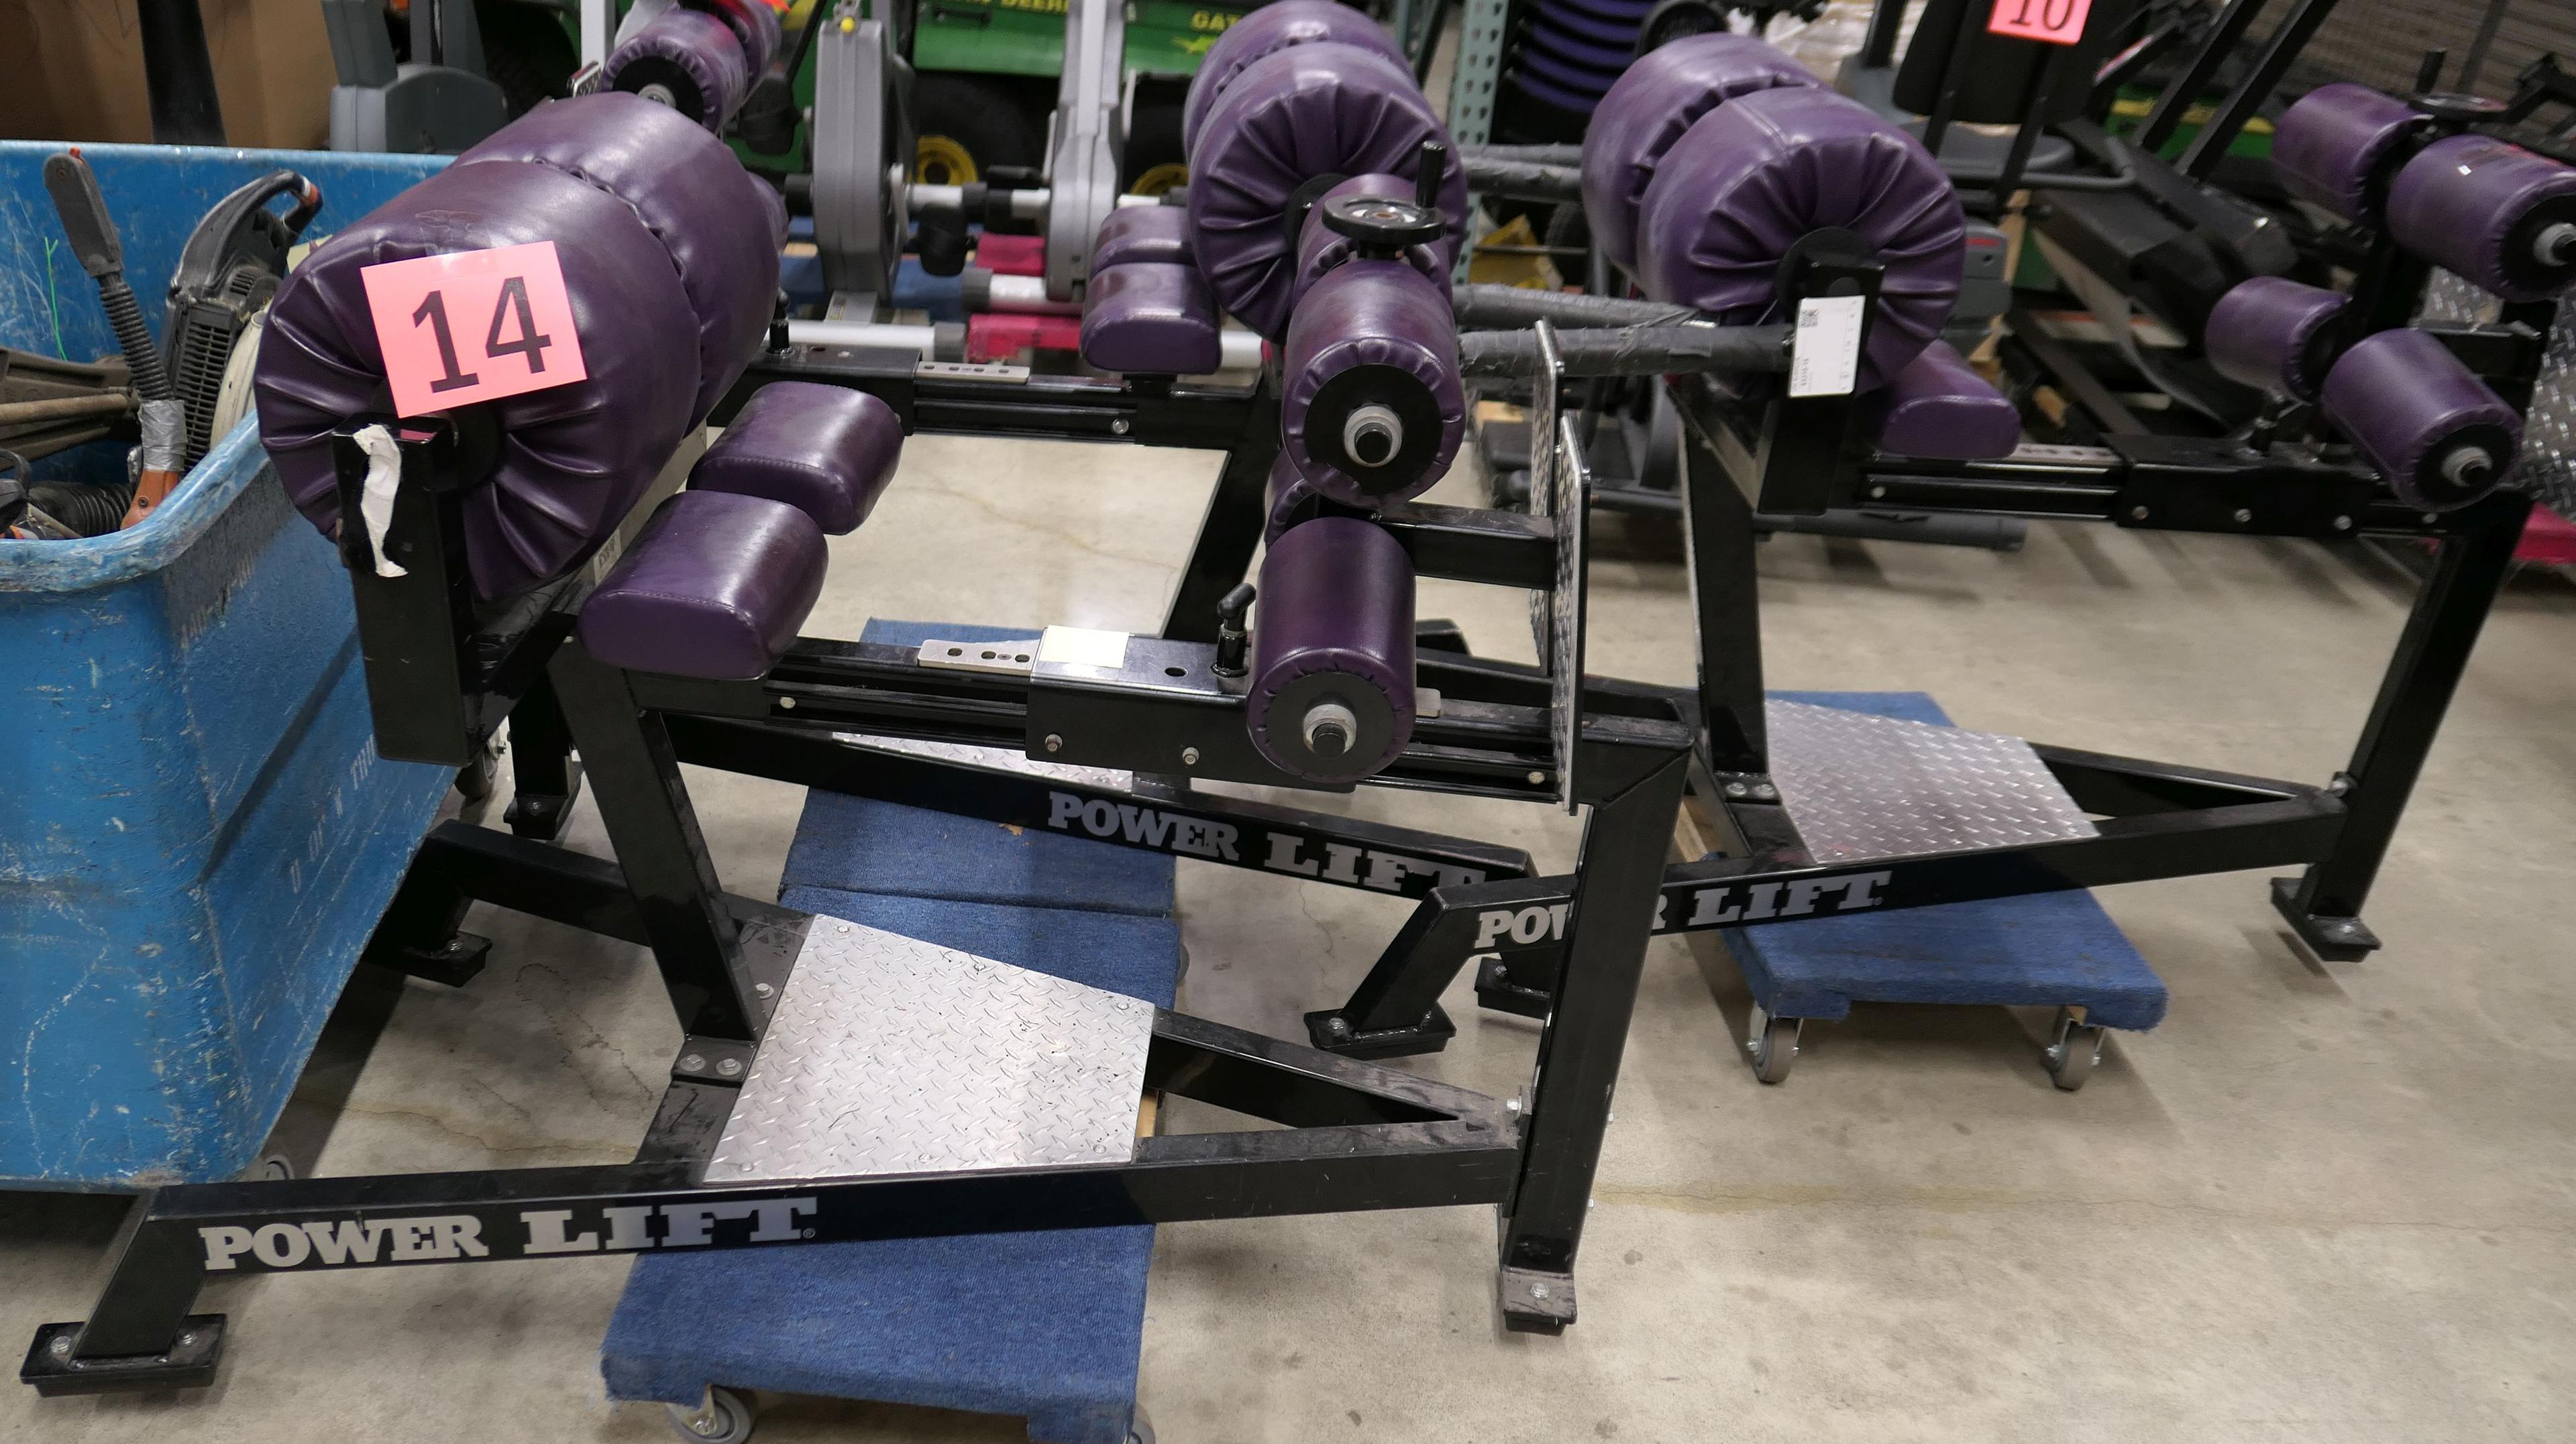 Exercise Equipment: Power Lift GHB, 3 Items on Dollies